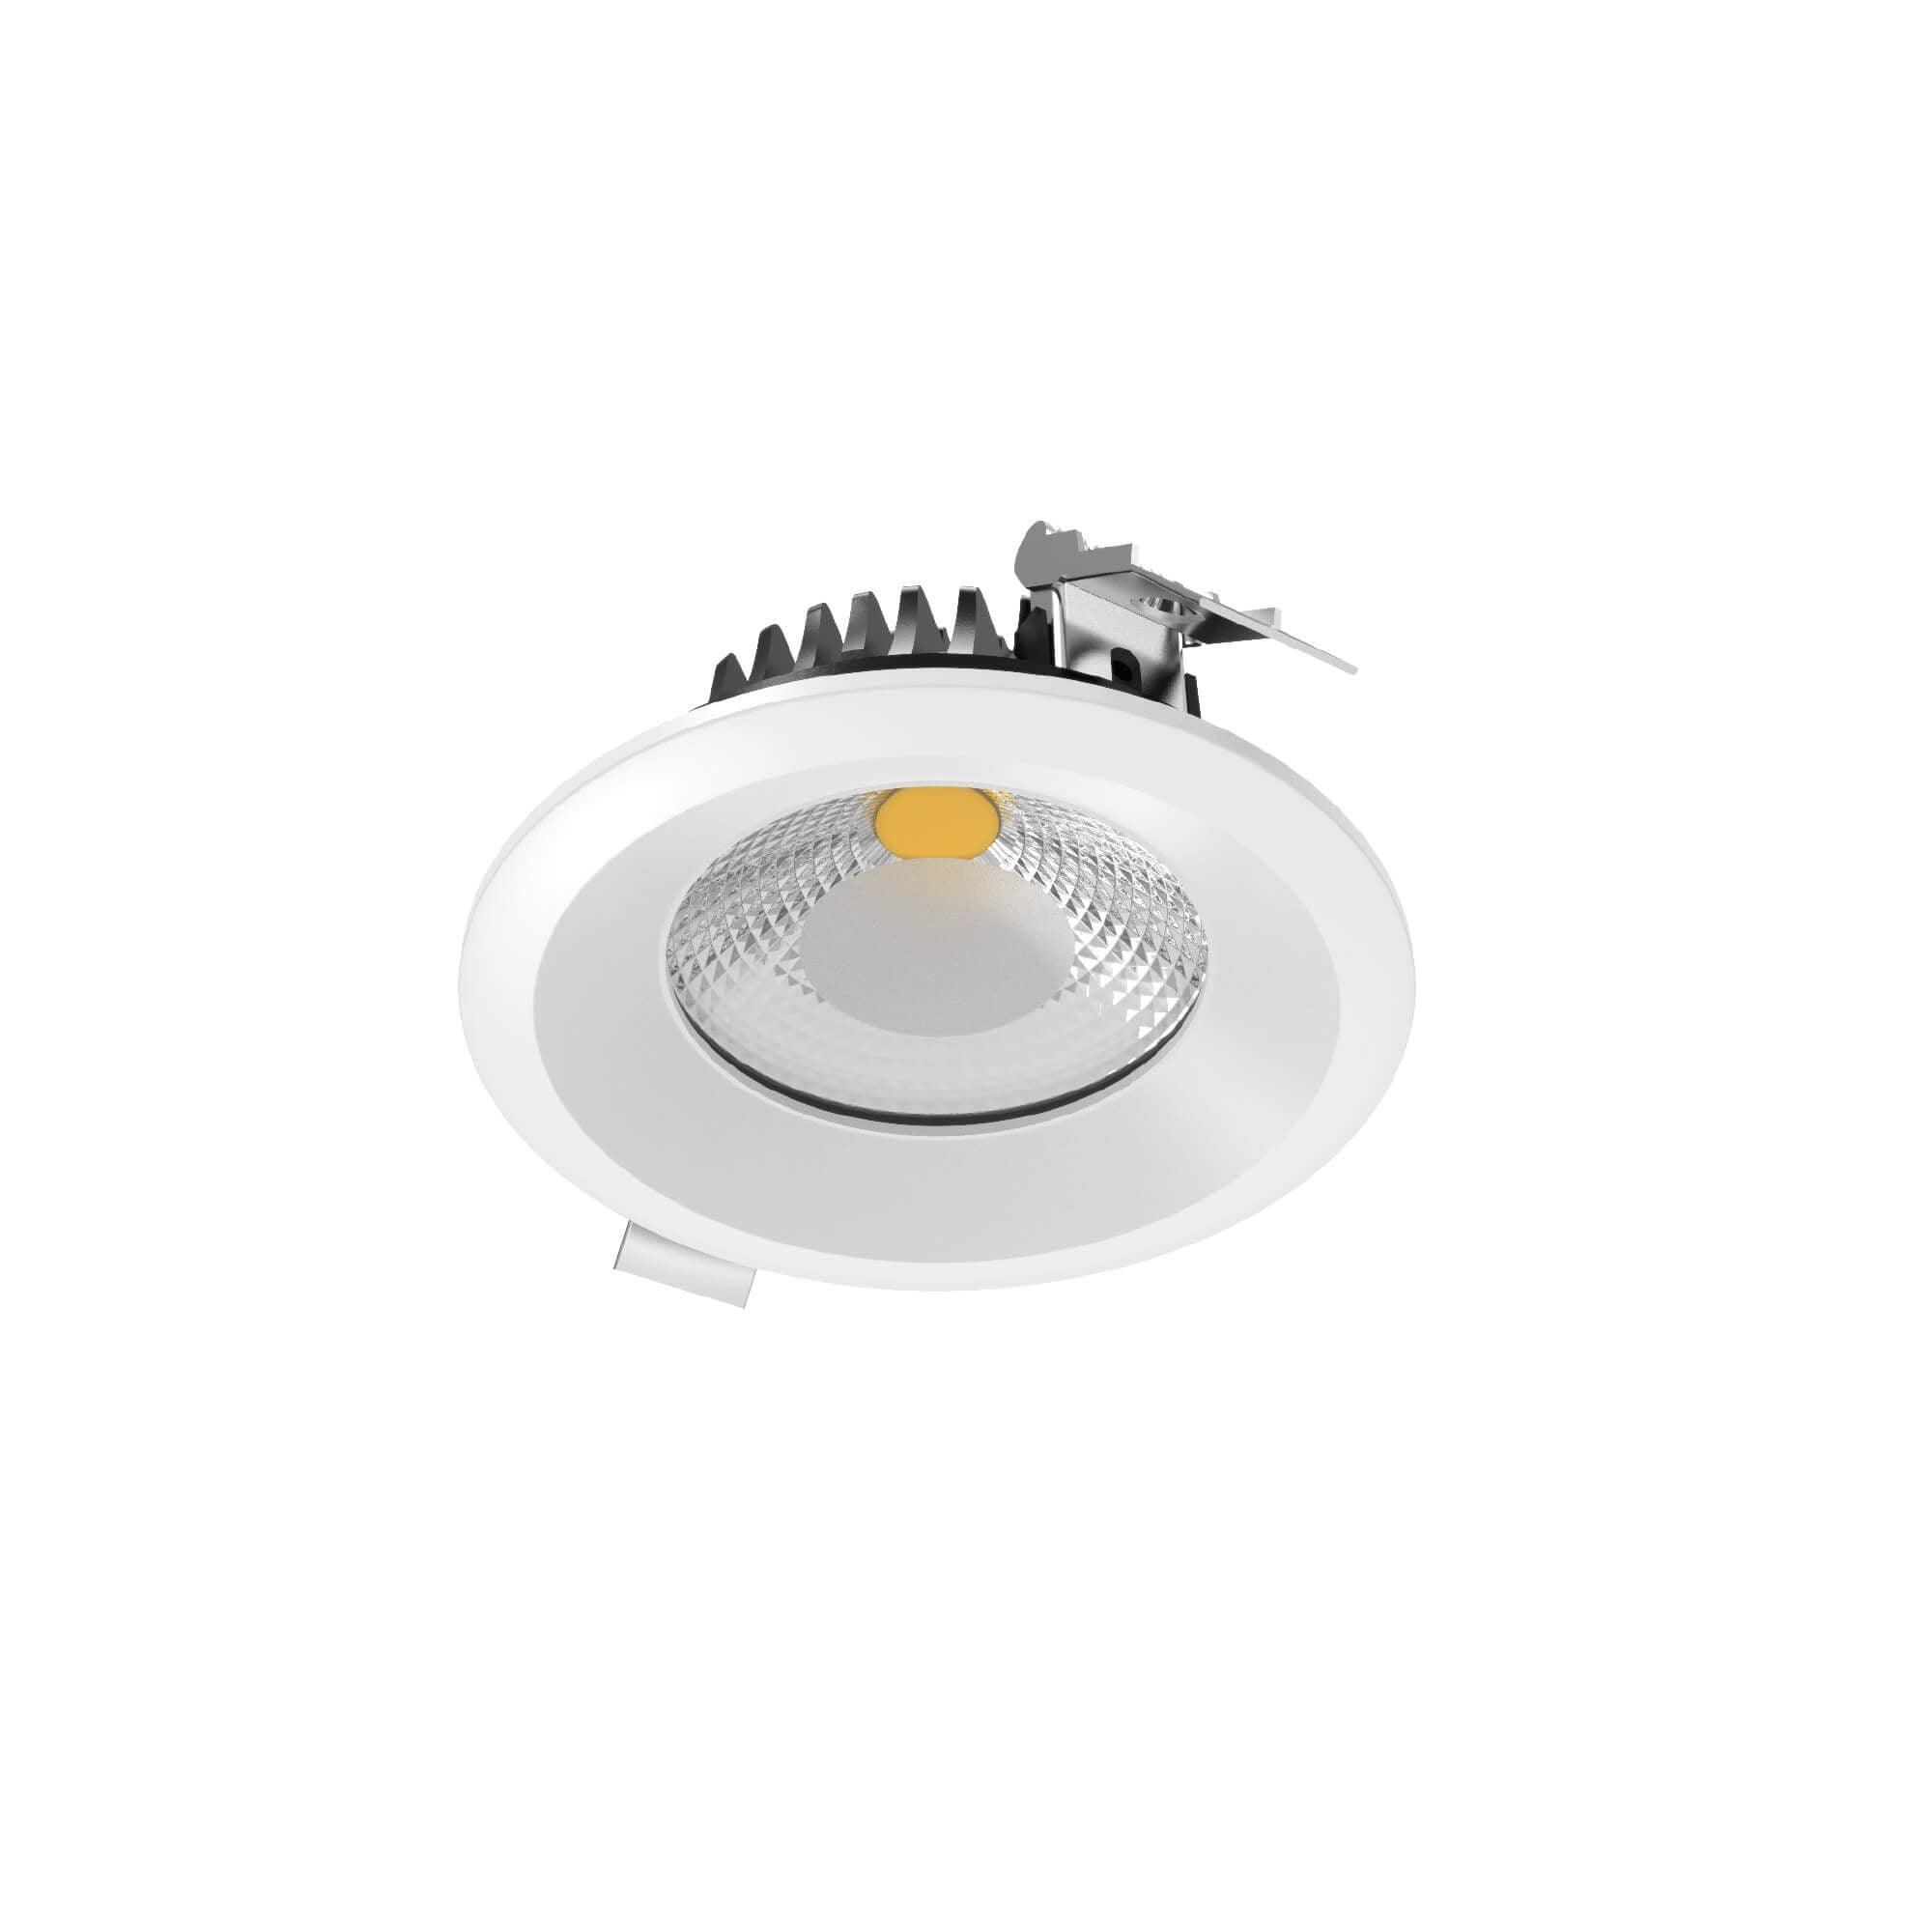 Dals Lighting - HPD 4 Inch High Powered LED Commercial Down Light - HPD4-CC-V-WH | Montreal Lighting & Hardware